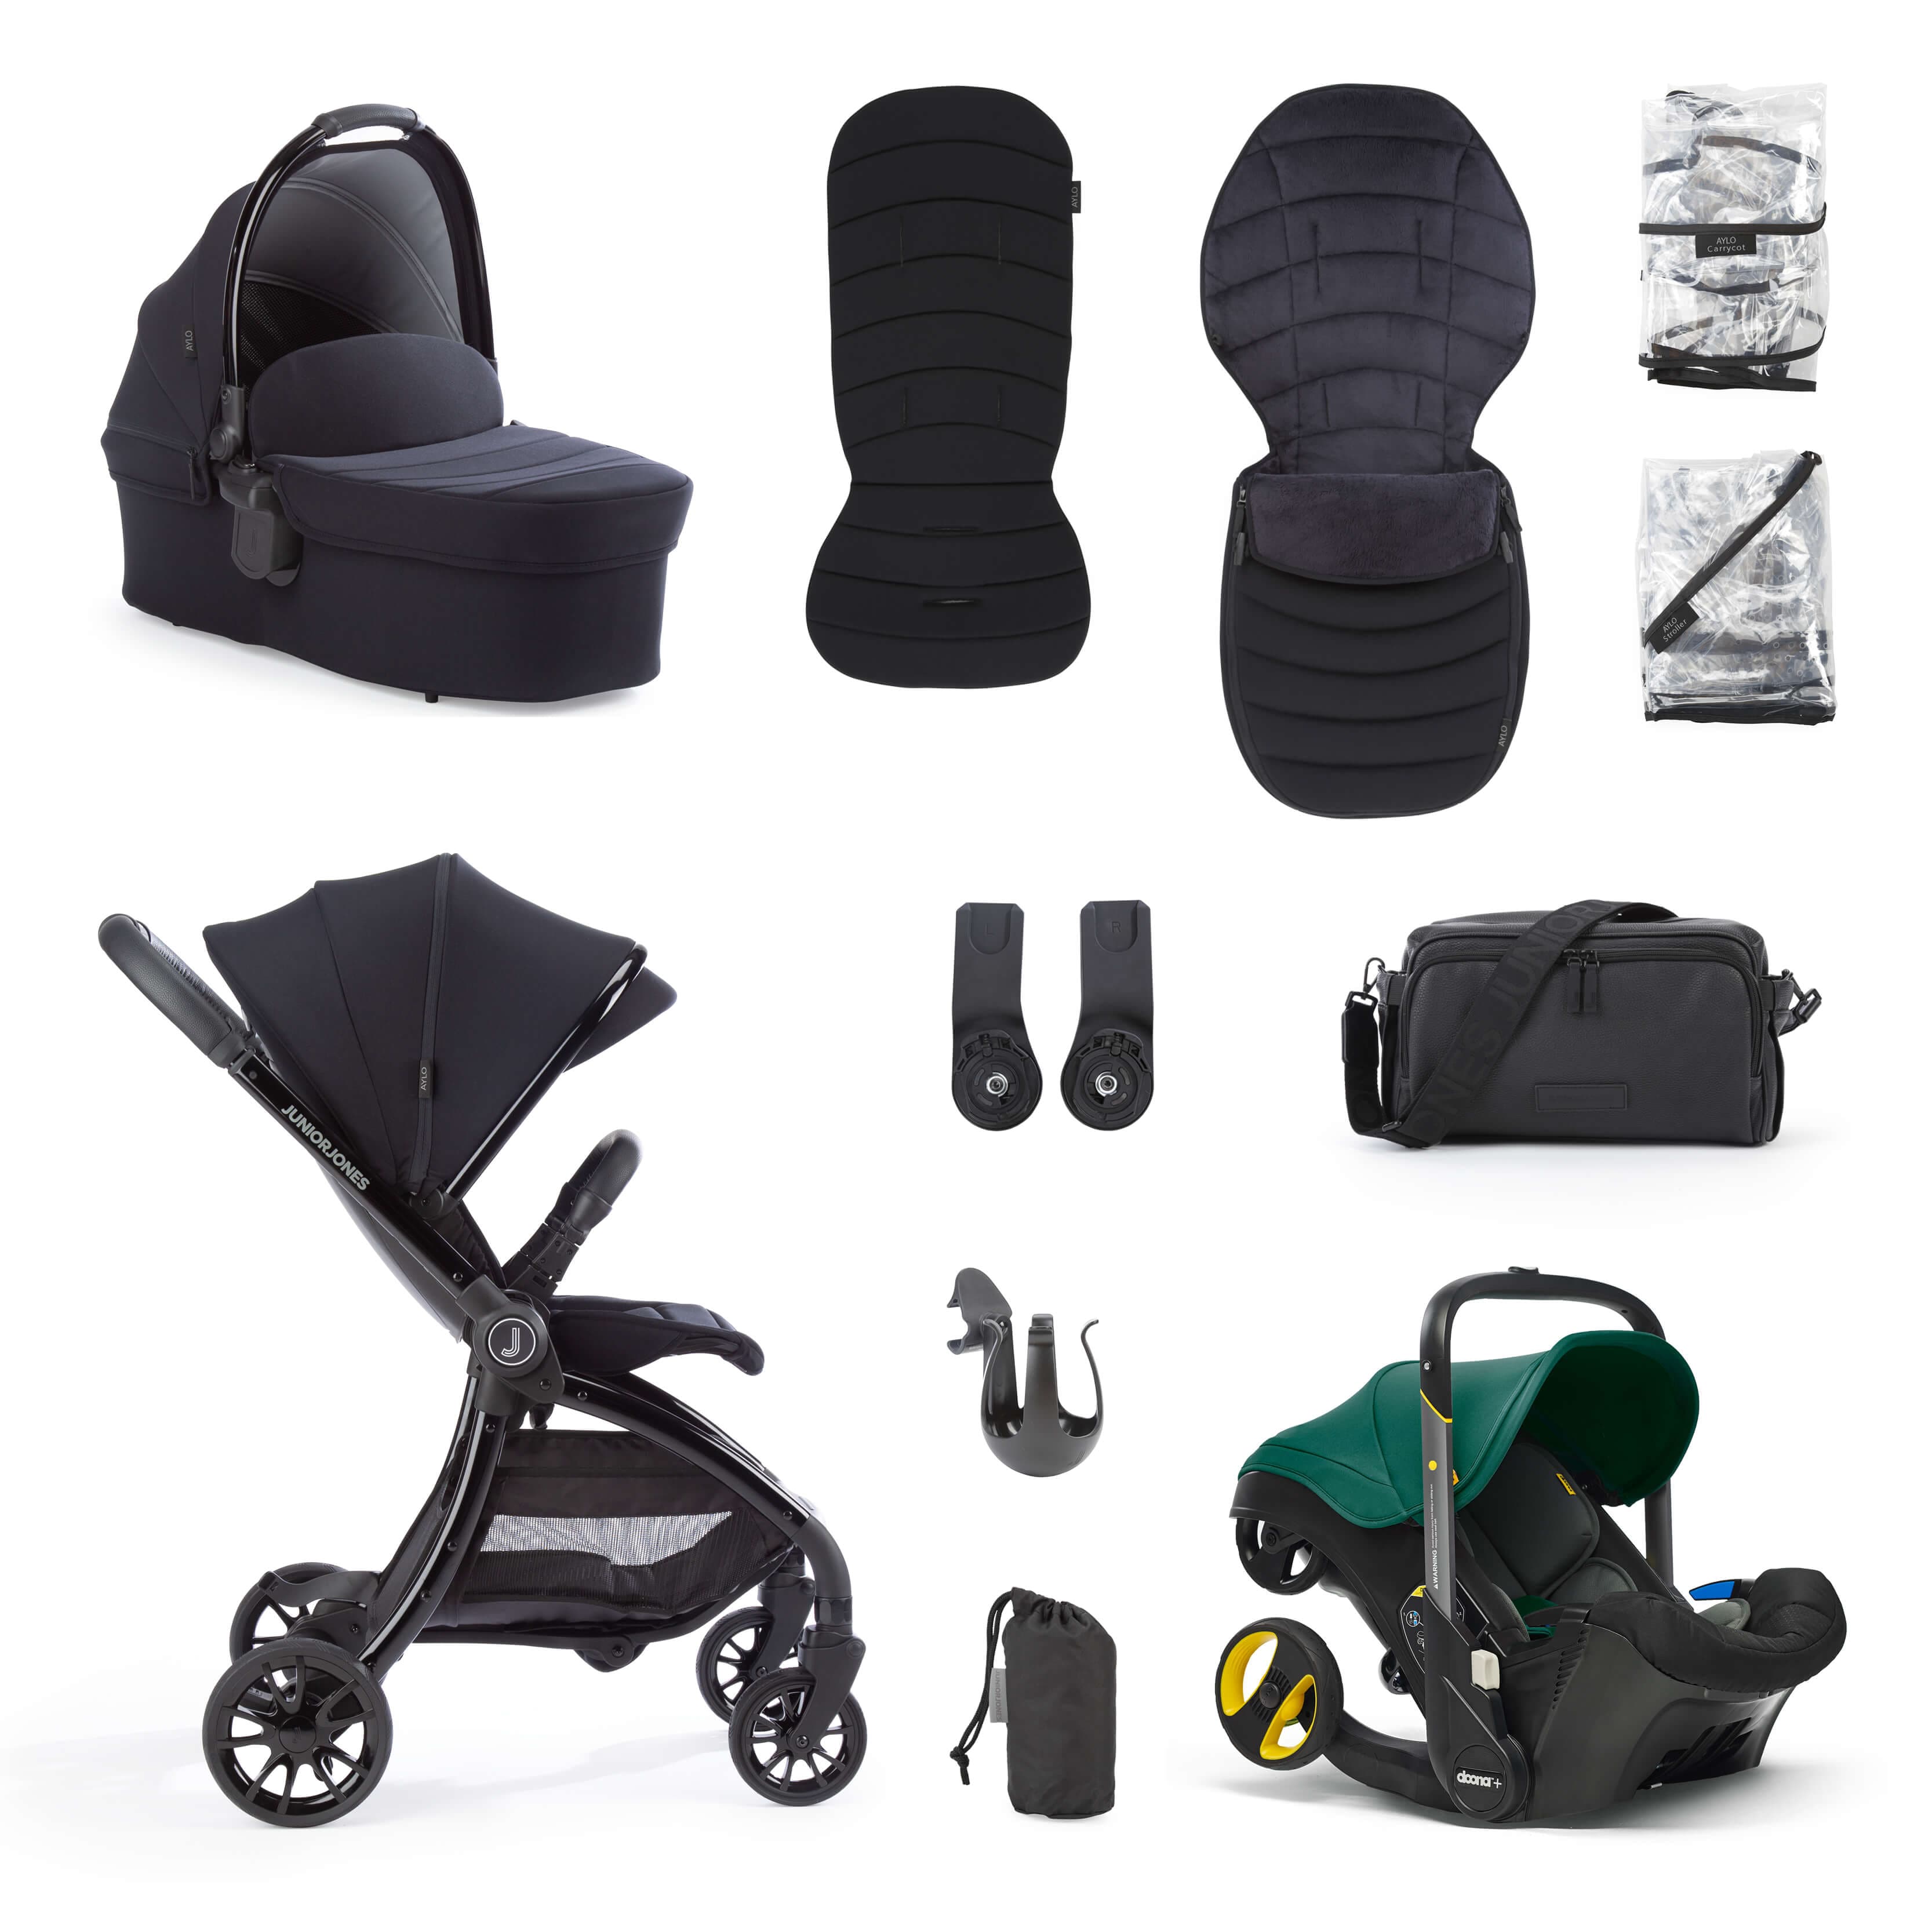 Junior Jones Aylo Rich Black 11pc Travel System inc Doona Racing Green Car Seat - For Your Little One